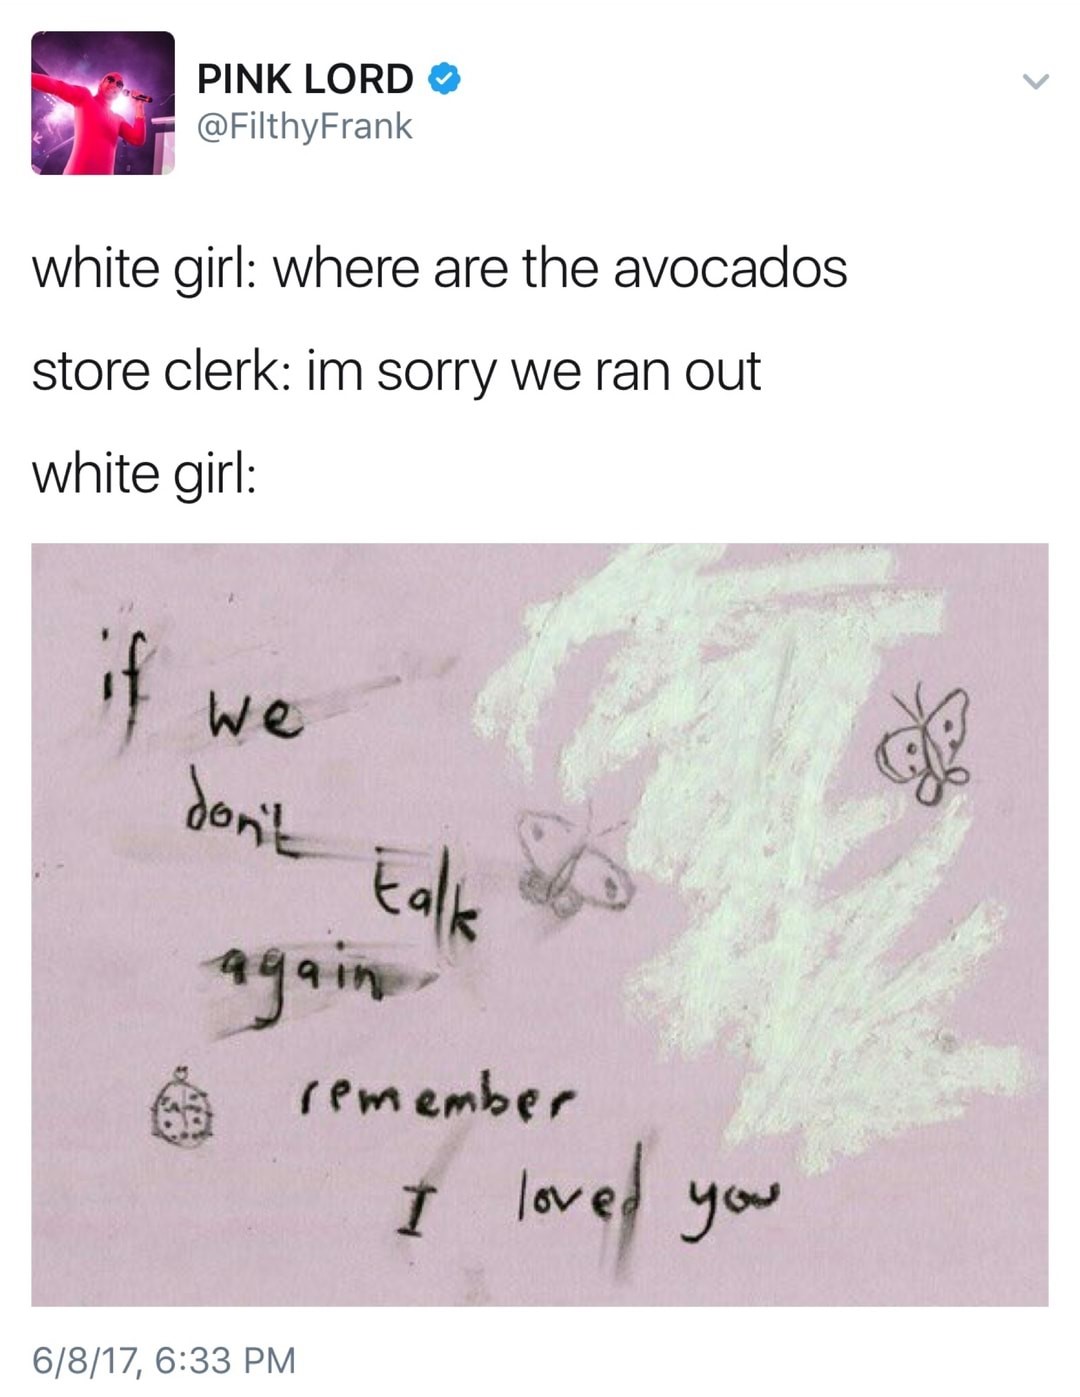 Meme making fun of how obsessed white girls are with avocados